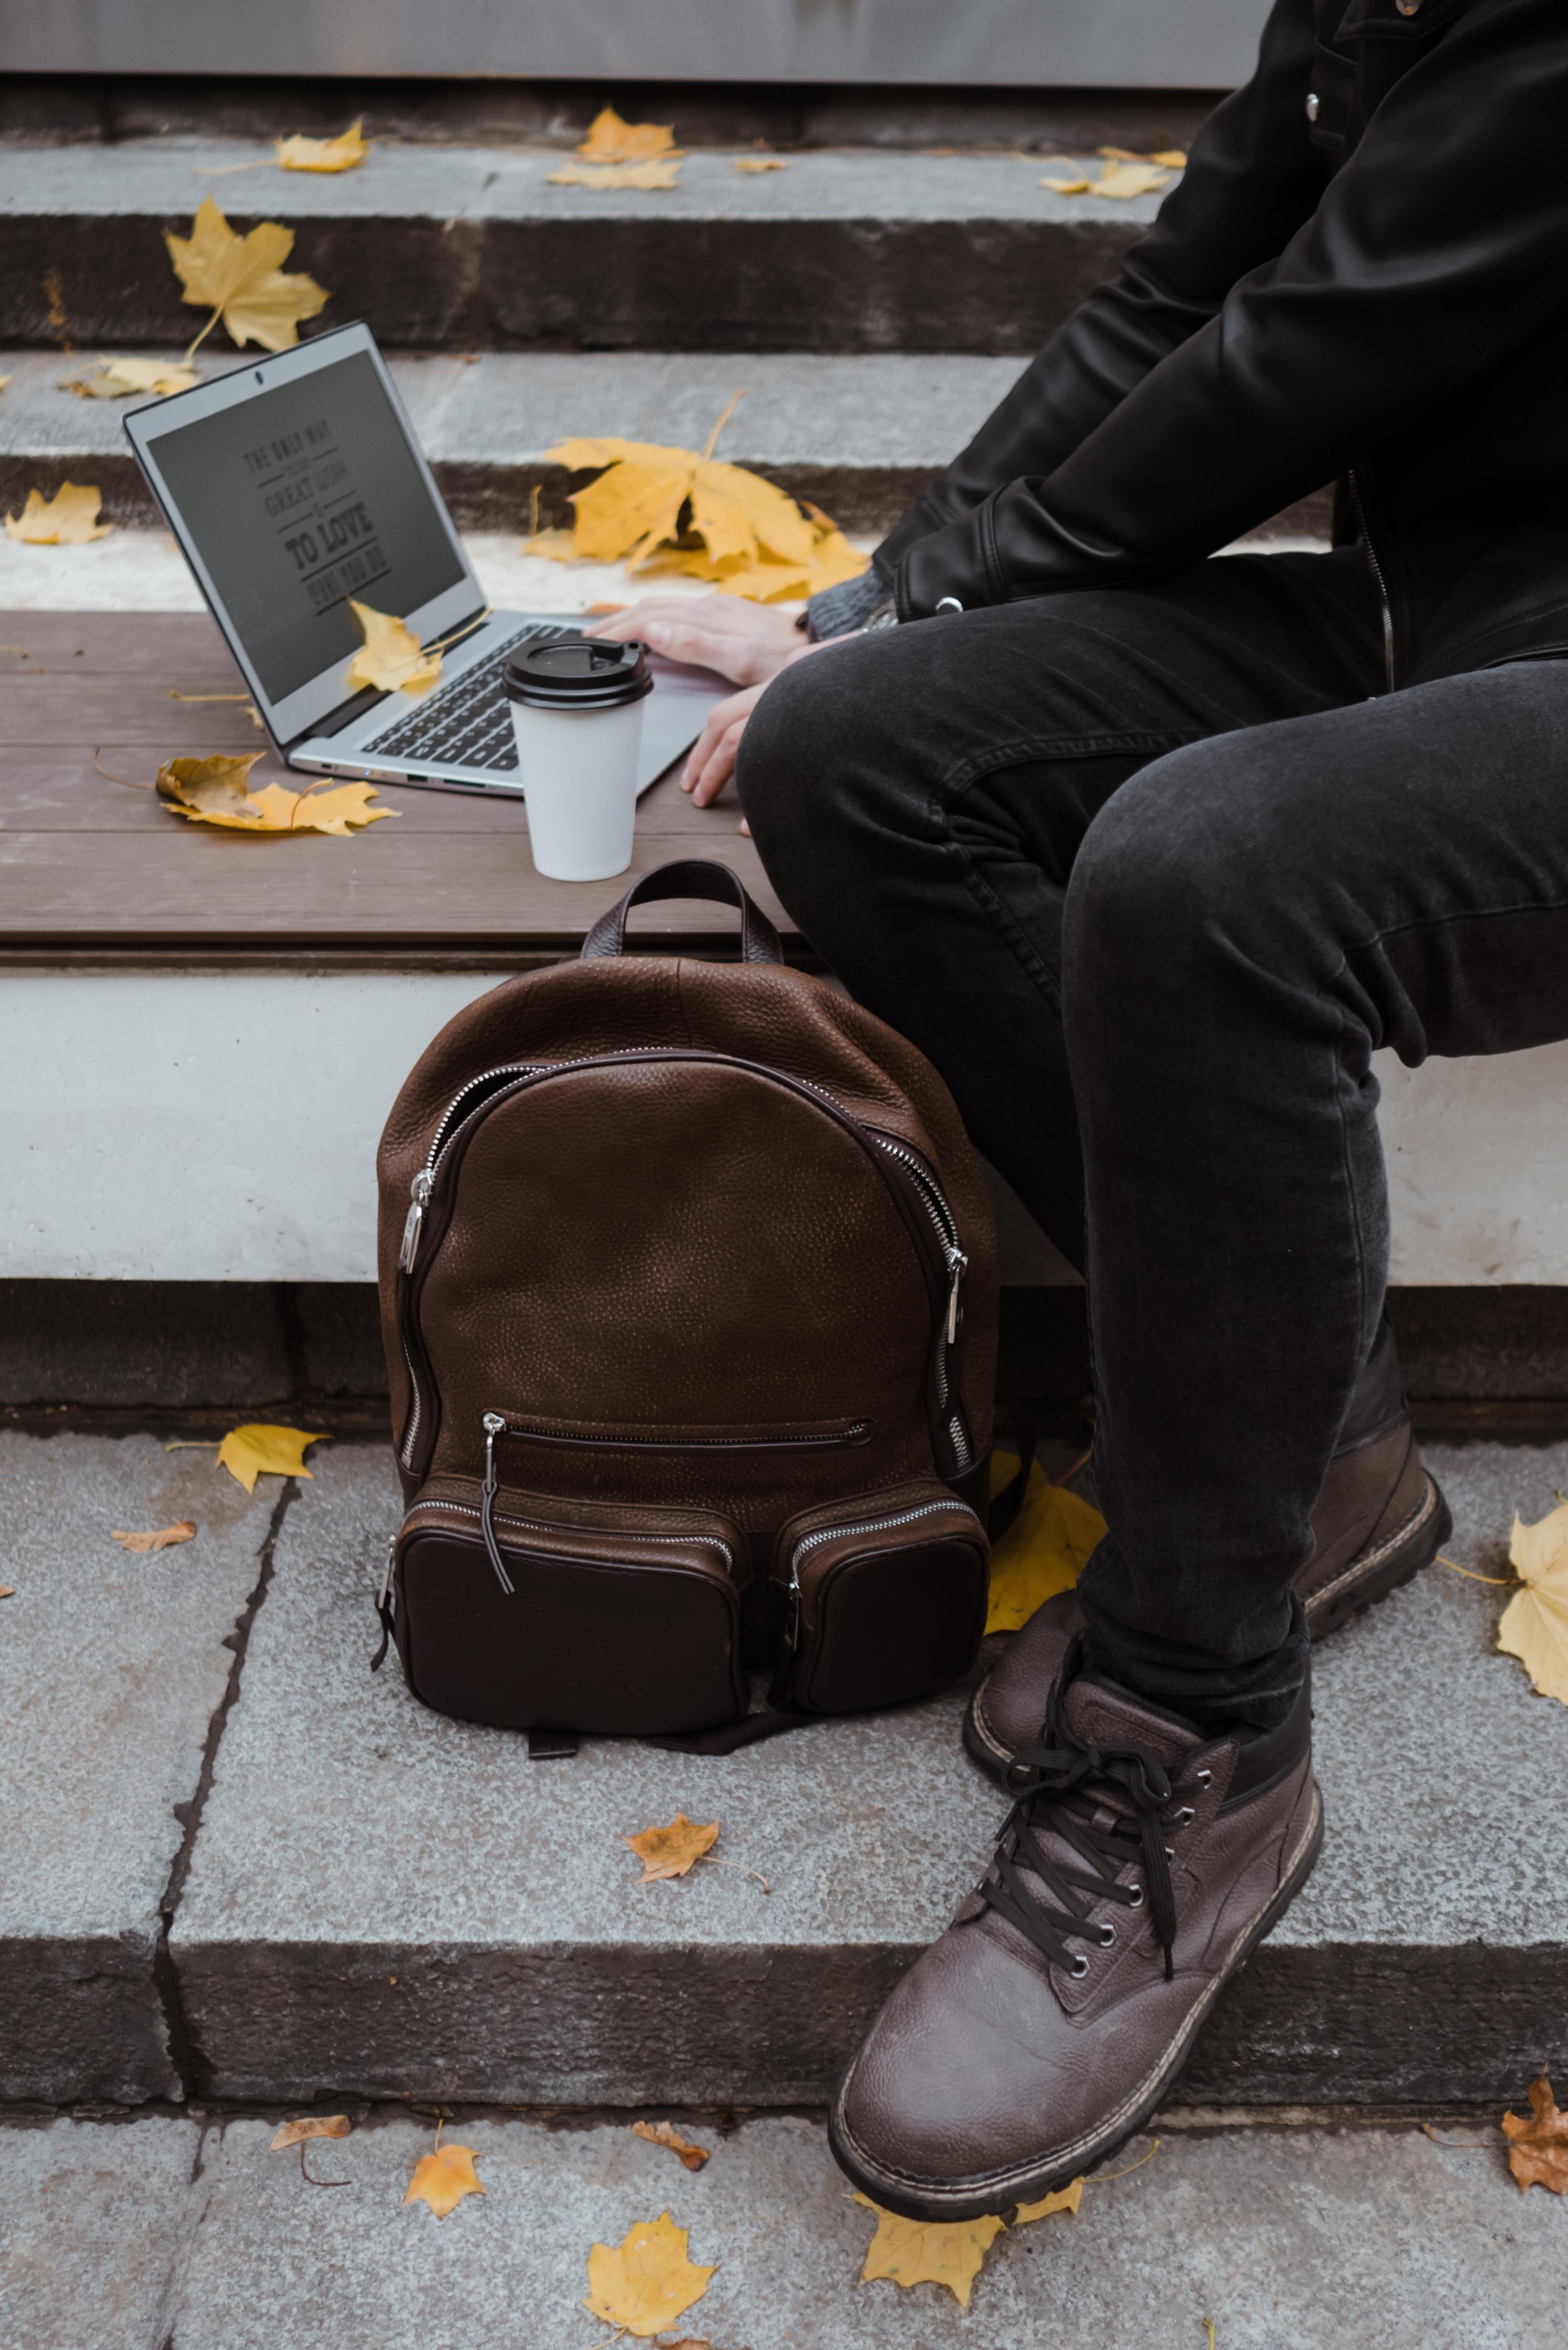 While working on a laptop, he put his RETRO VINTAGE LEATHER BACKPACK "BONA FIDE" on the asphalt. - Gentcreate